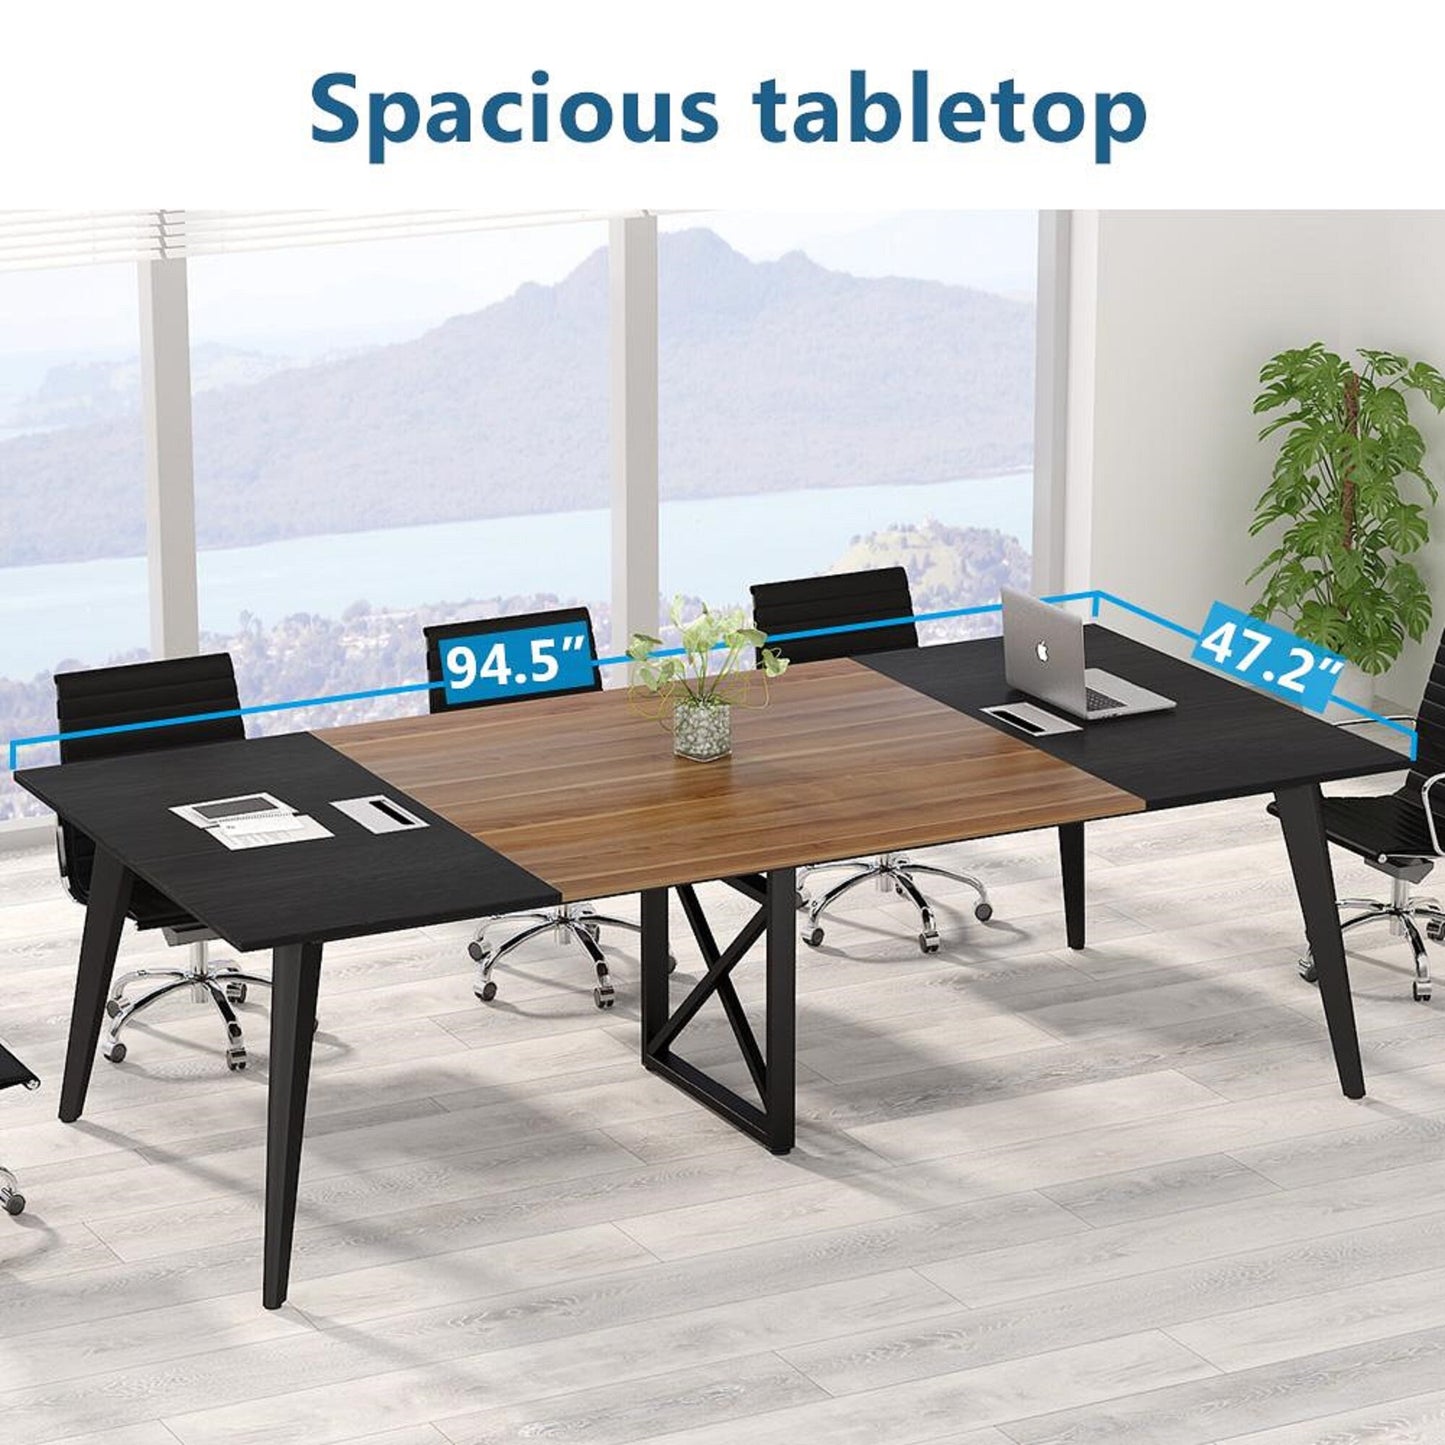 8FT Conference Table, 94.5L x 47.2W inch Large Meeting Table